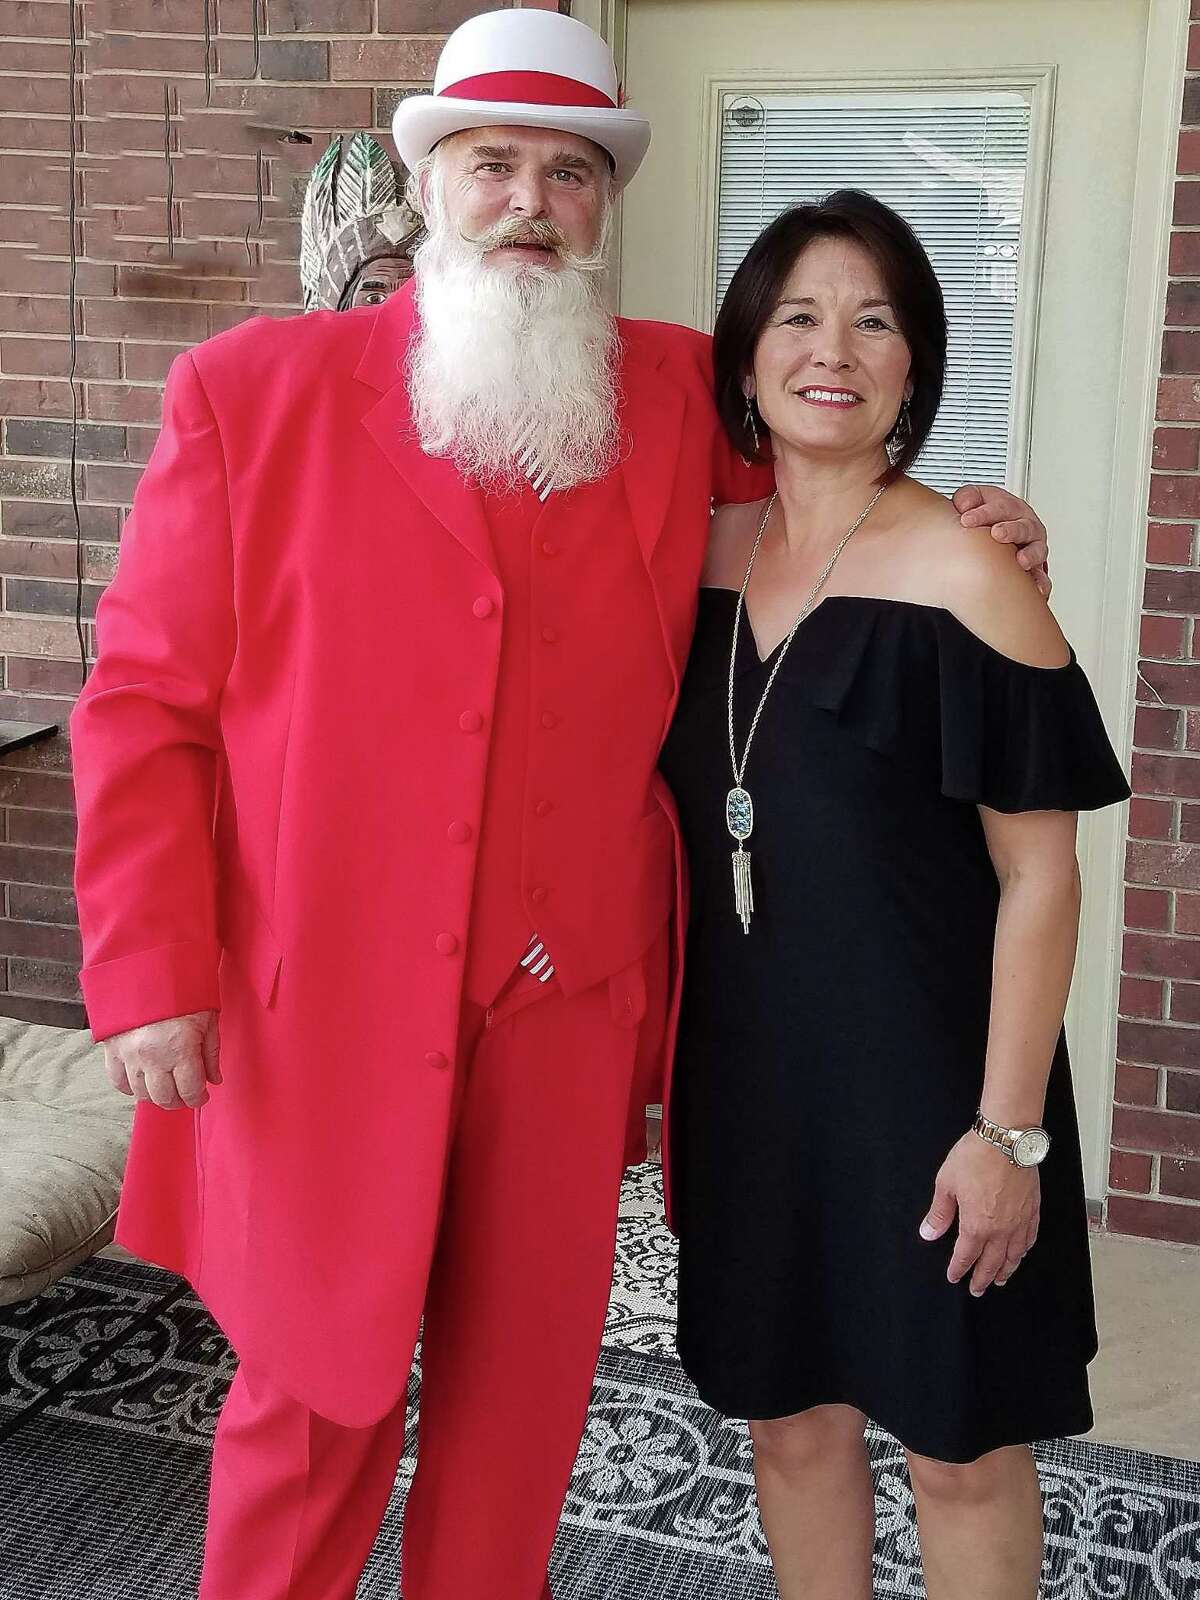 Santa Jack's favorite elf is his wife Miline who assists him and is very supportive of his volunteer and charity work.